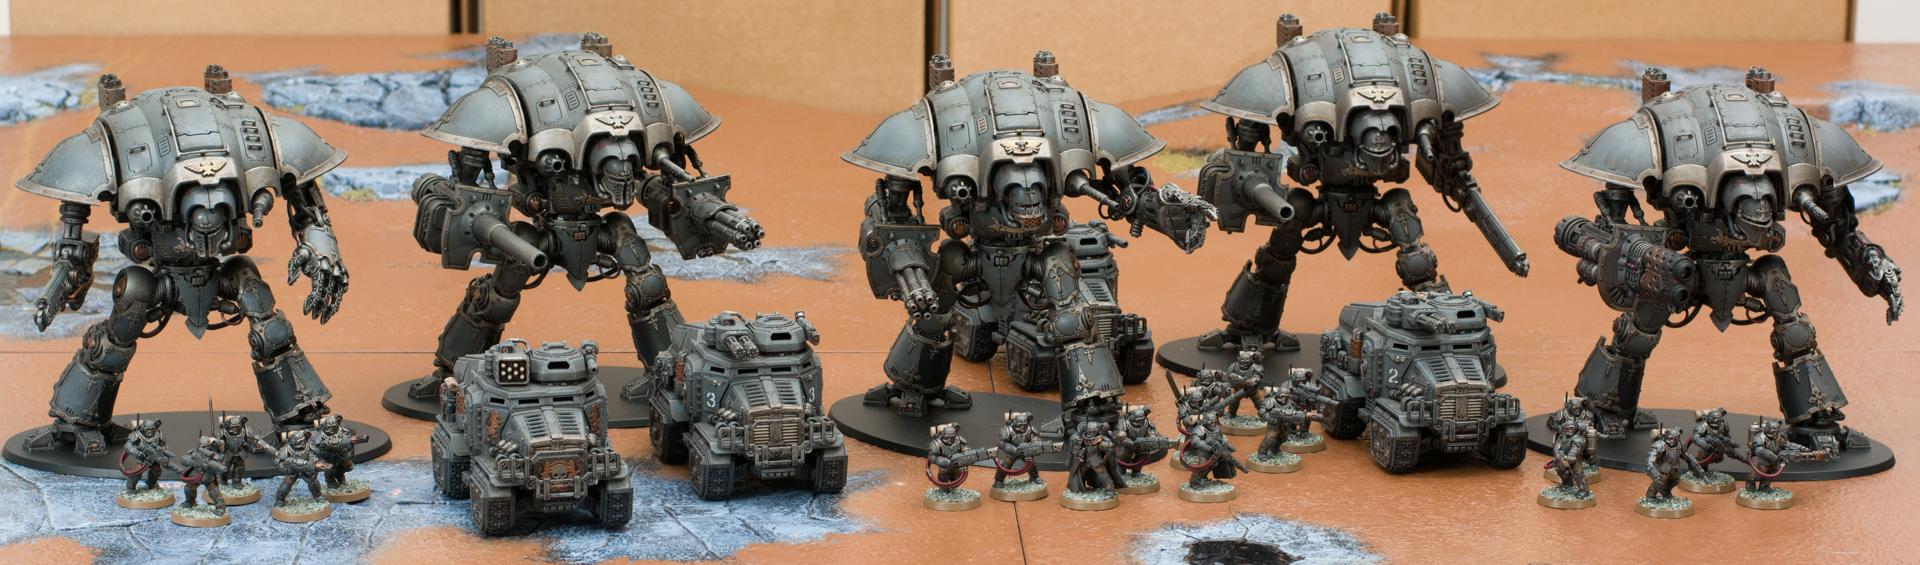 Imperial Knights & Household Infantry - 3.1K - Finished - Forum